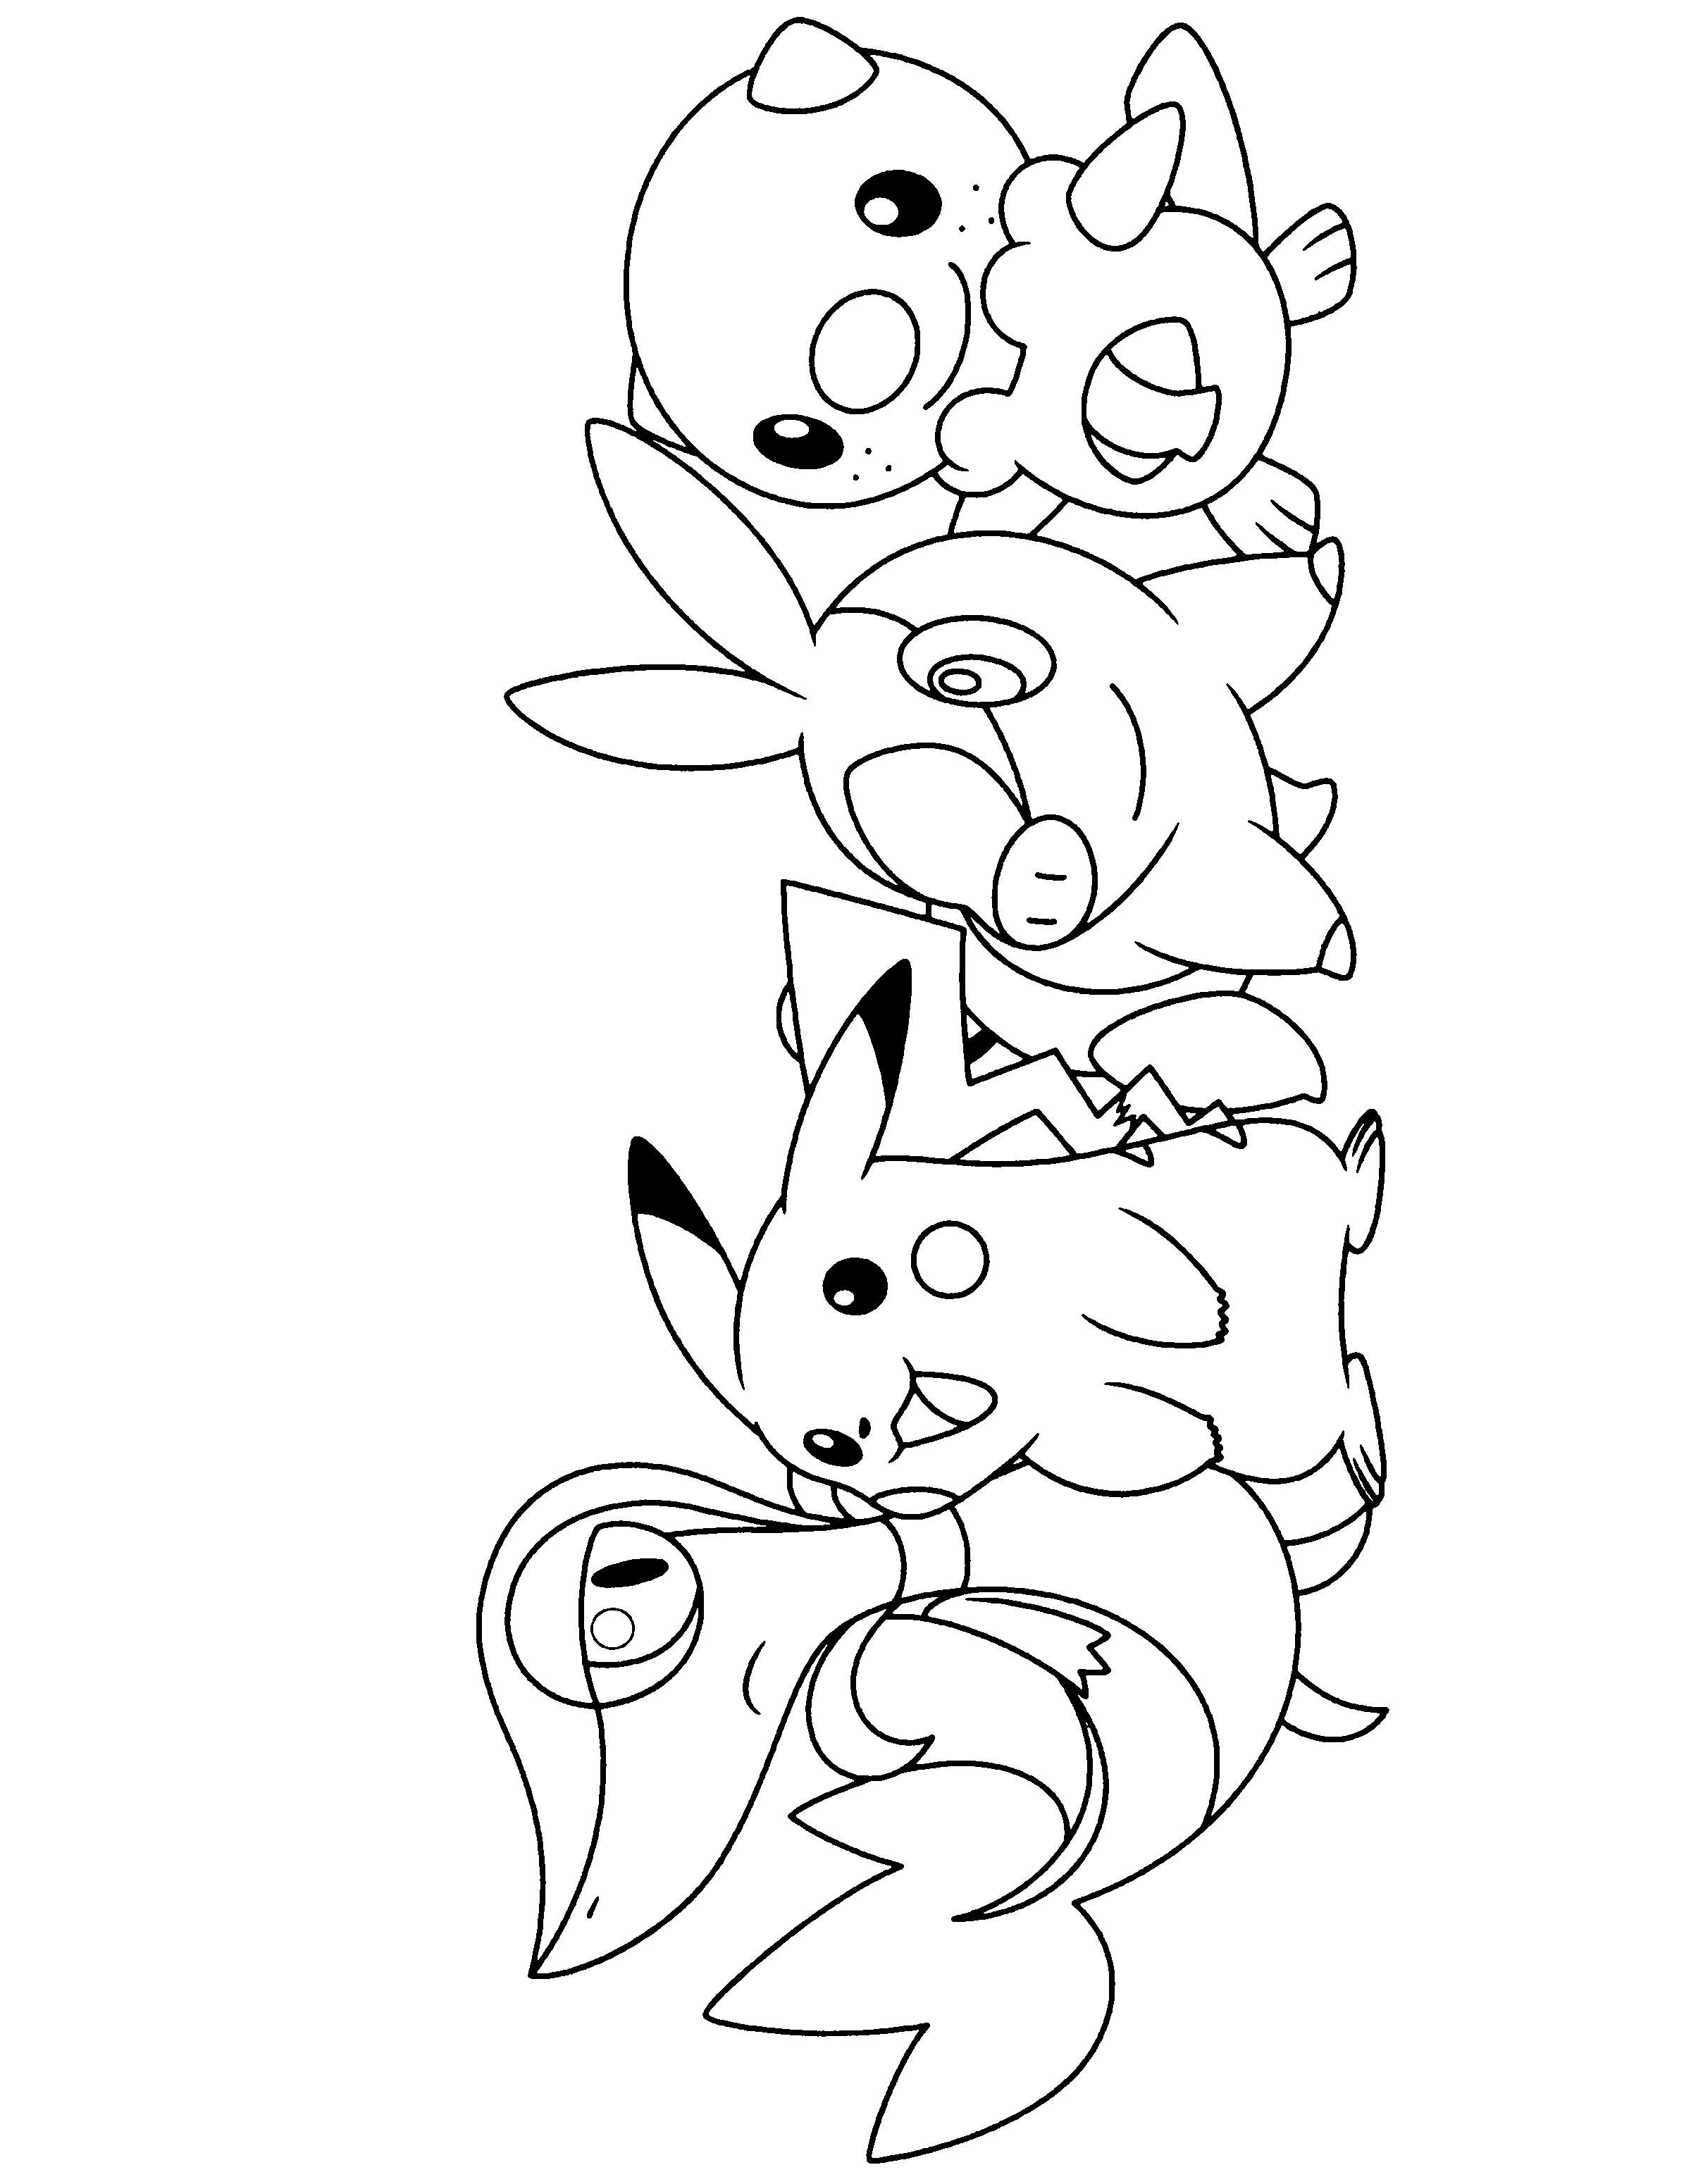 Pokemon Black And White Coloring Pages - Google Search | Coloring - Free Printable Coloring Pages Pokemon Black White